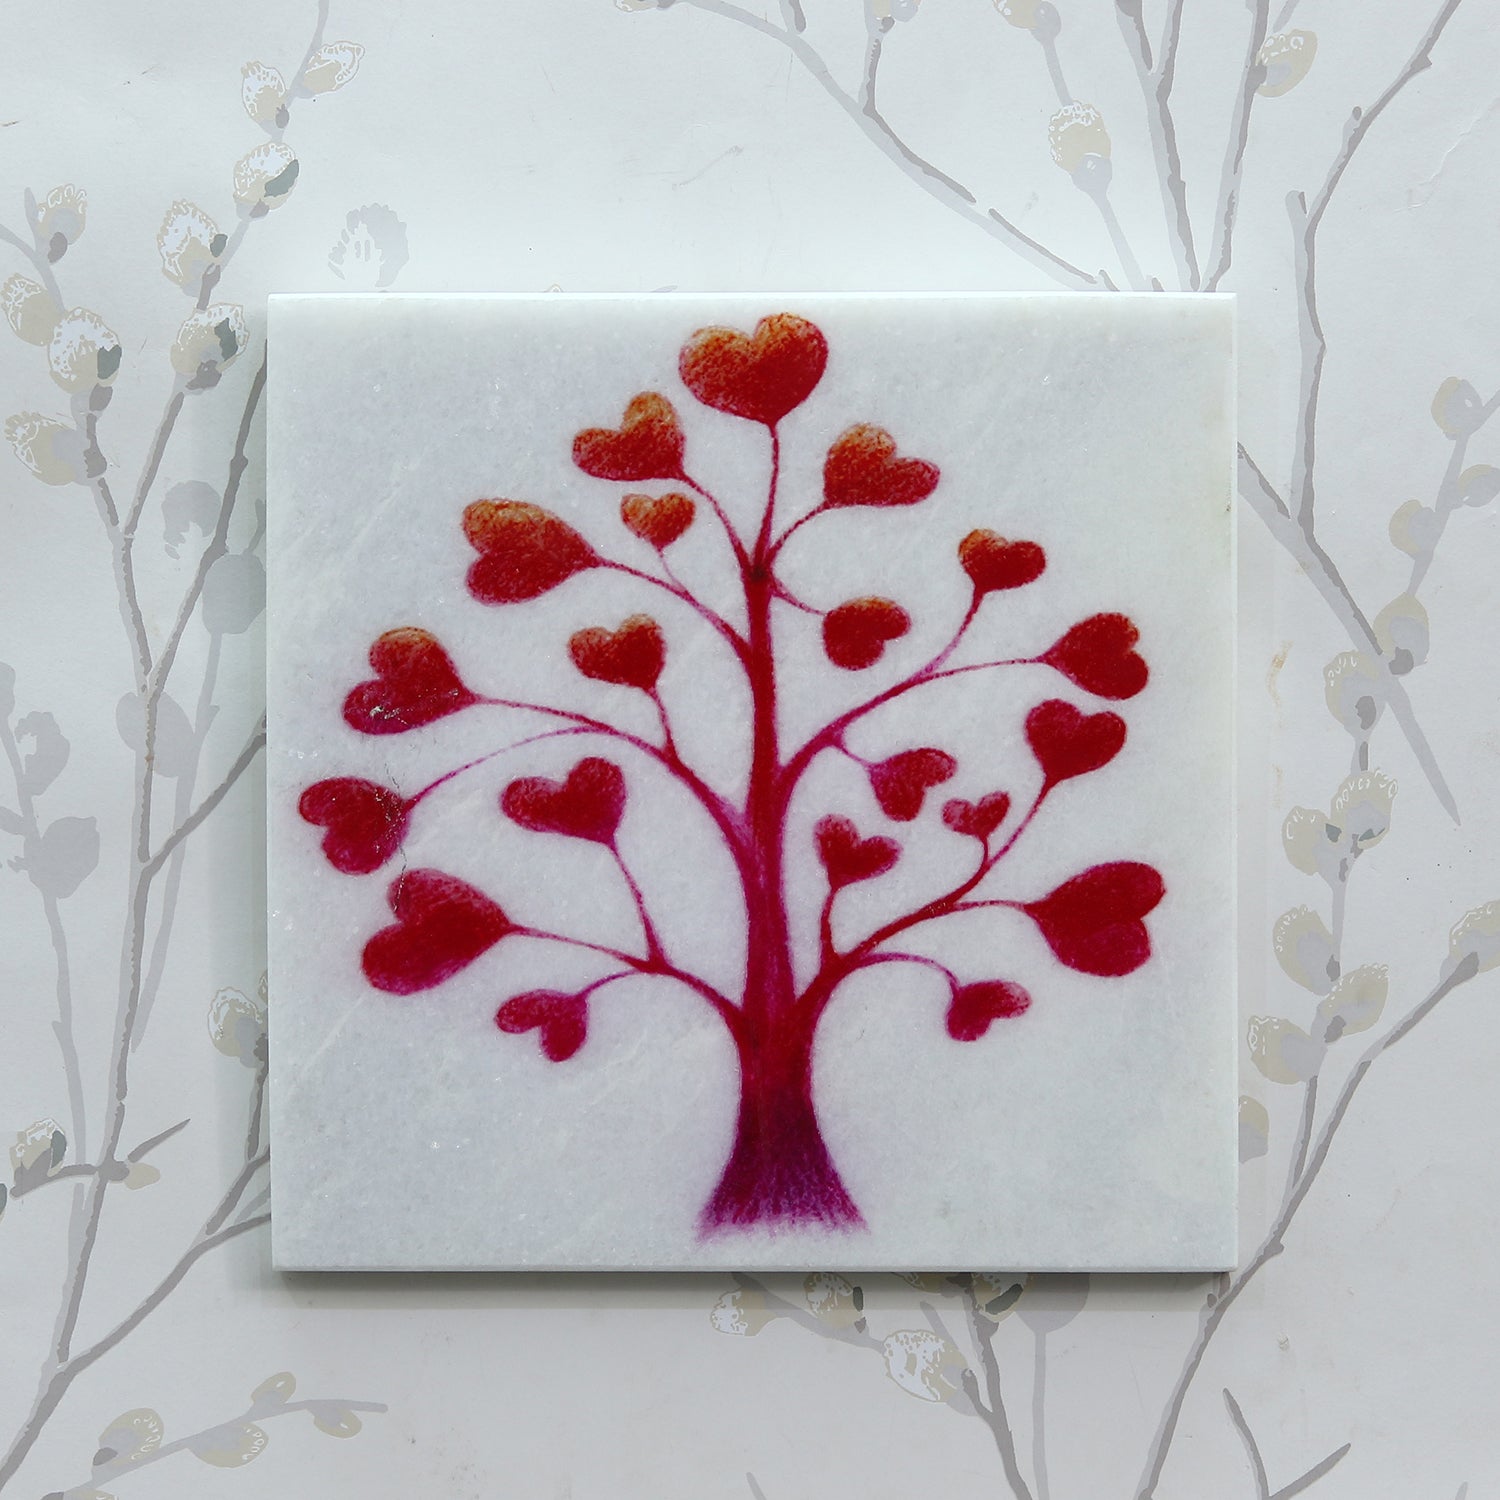 Red Hearts Tree Painting On Marble Square Tile